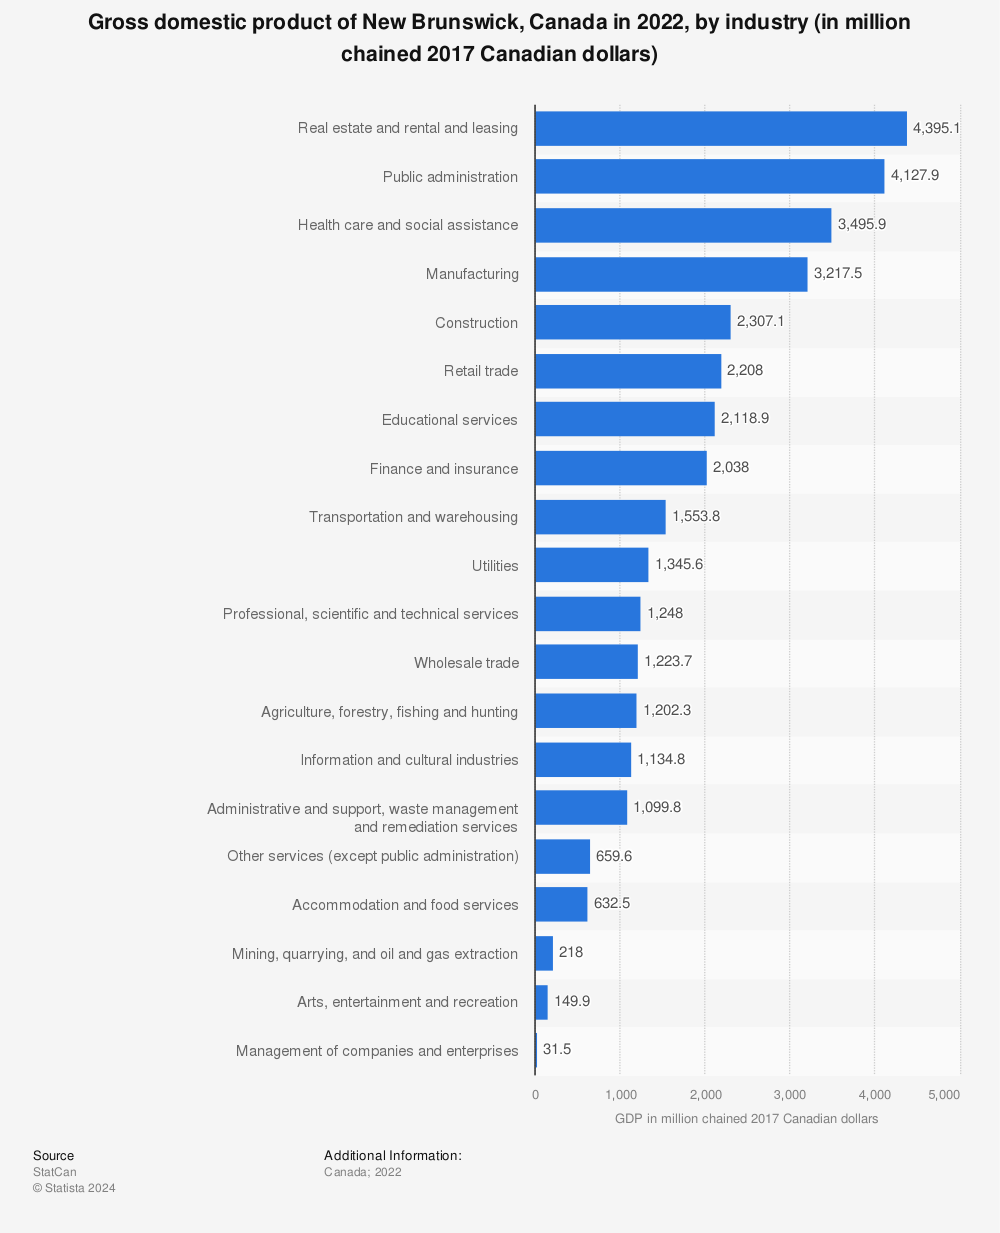 Statistic: Gross domestic product of New Brunswick, Canada in 2022, by industry (in million chained 2012 Canadian dollars) | Statista